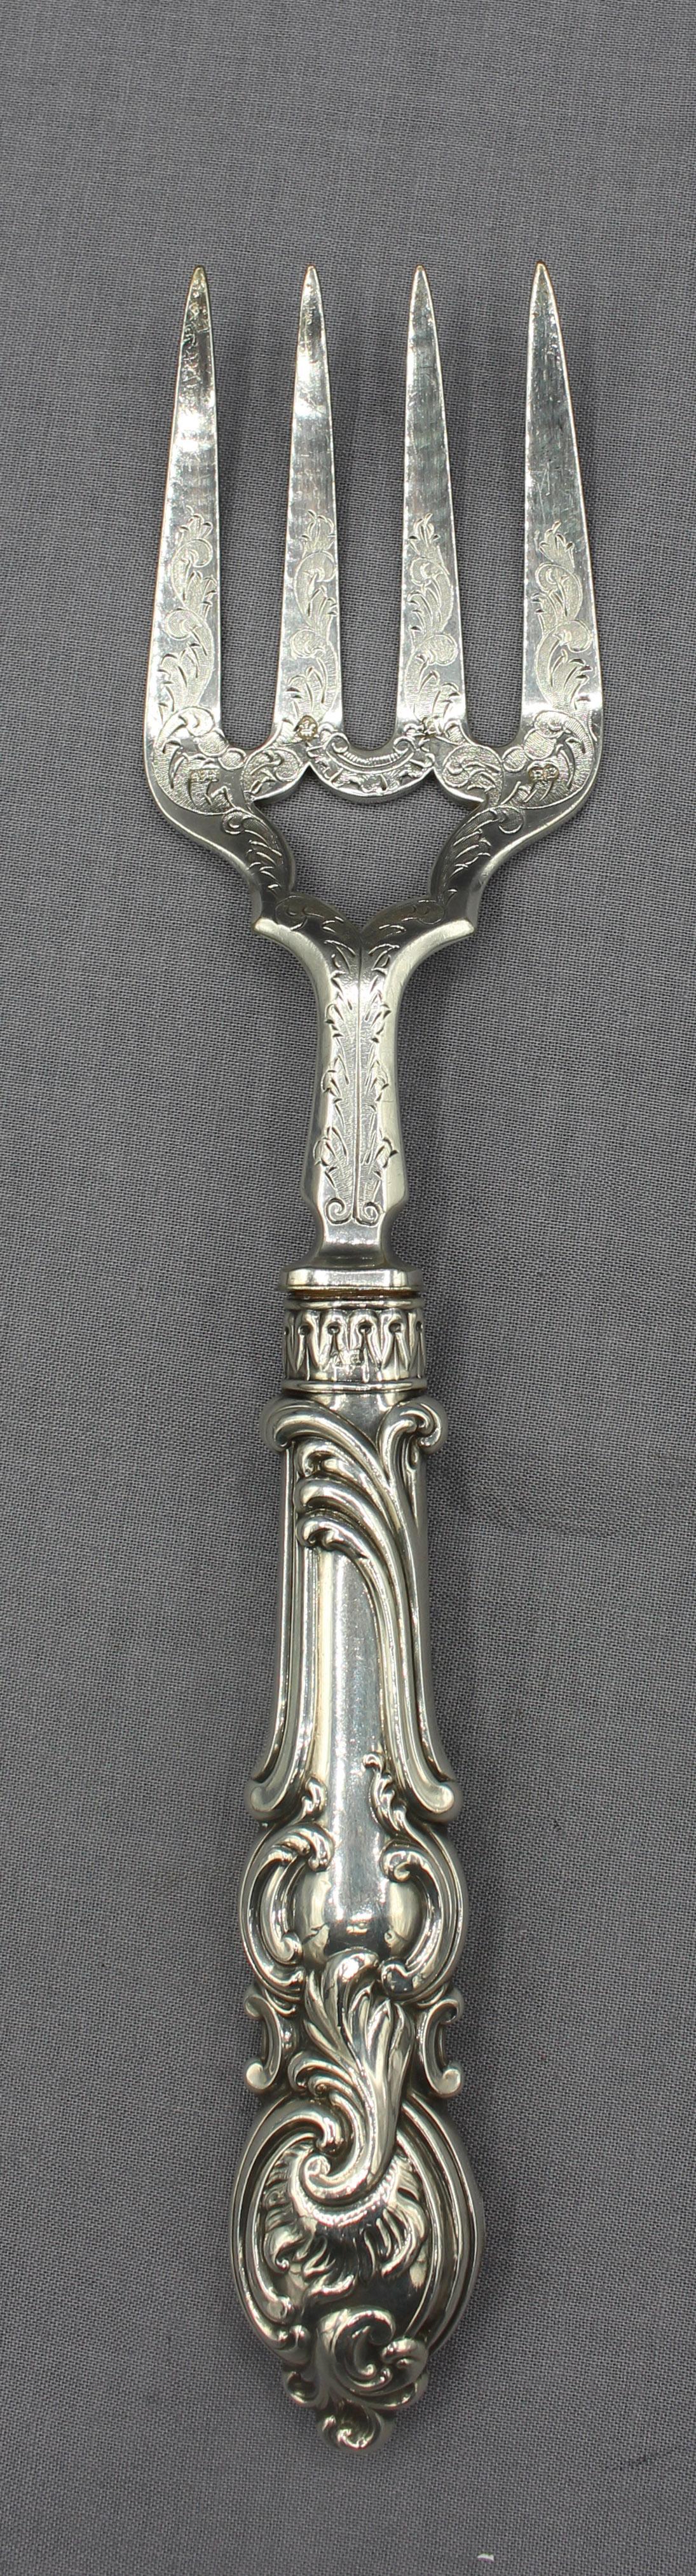 Aesthetic Movement 1852 English Sterling Handled Fish Servers by Aaron Hatfield & Sons